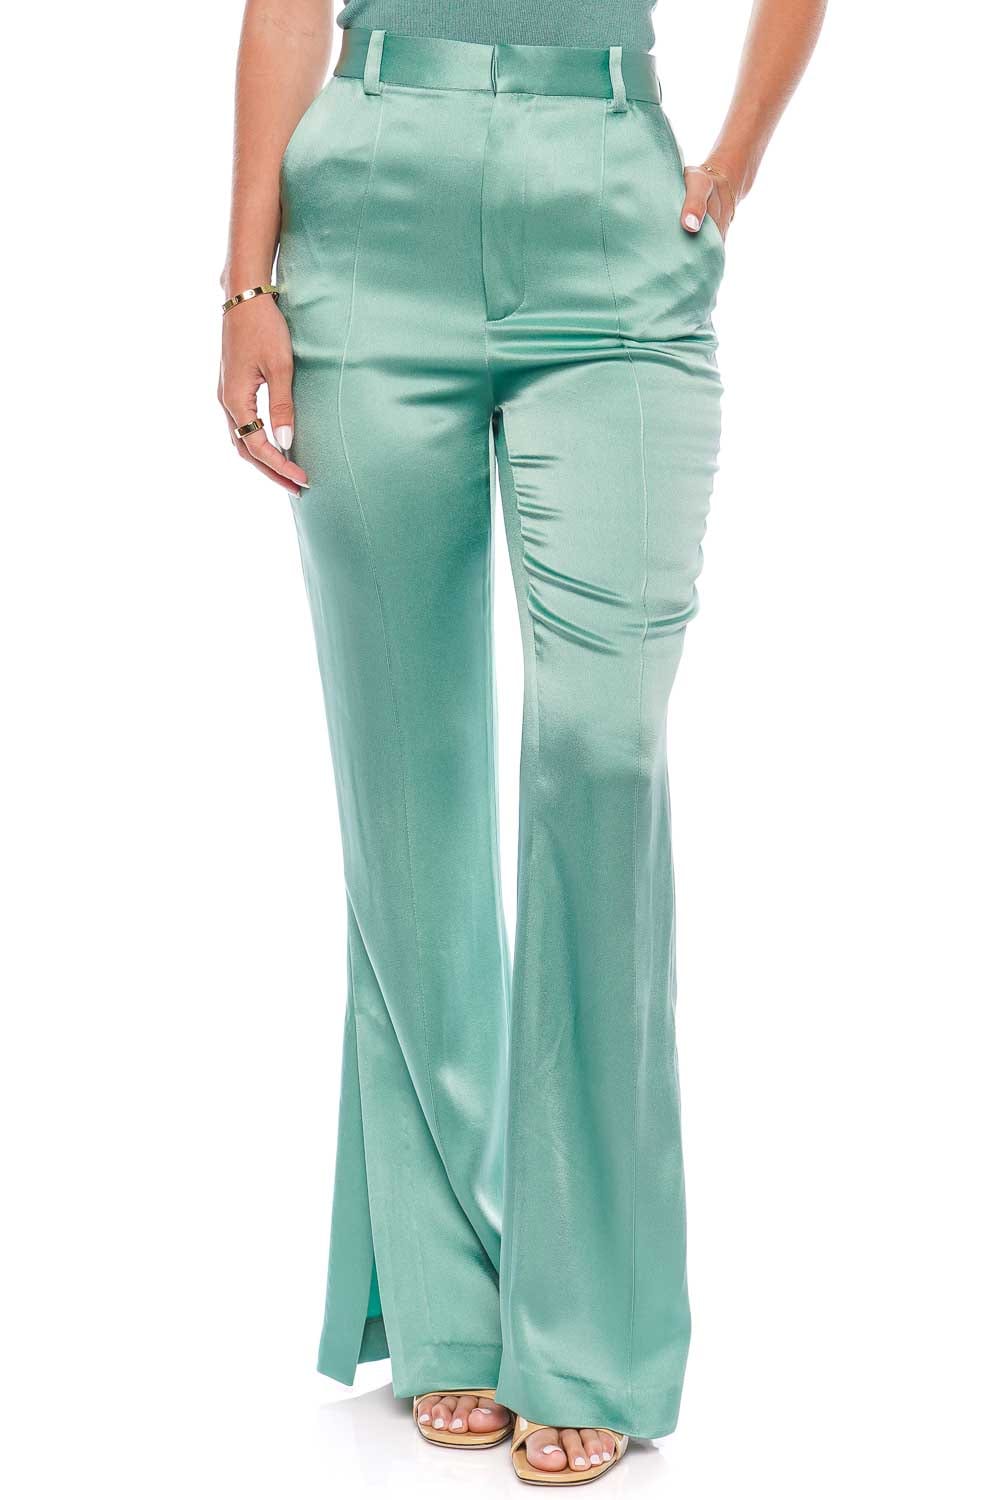 LAPOINTE Doubleface Satin High Waisted Flare Leg Pant